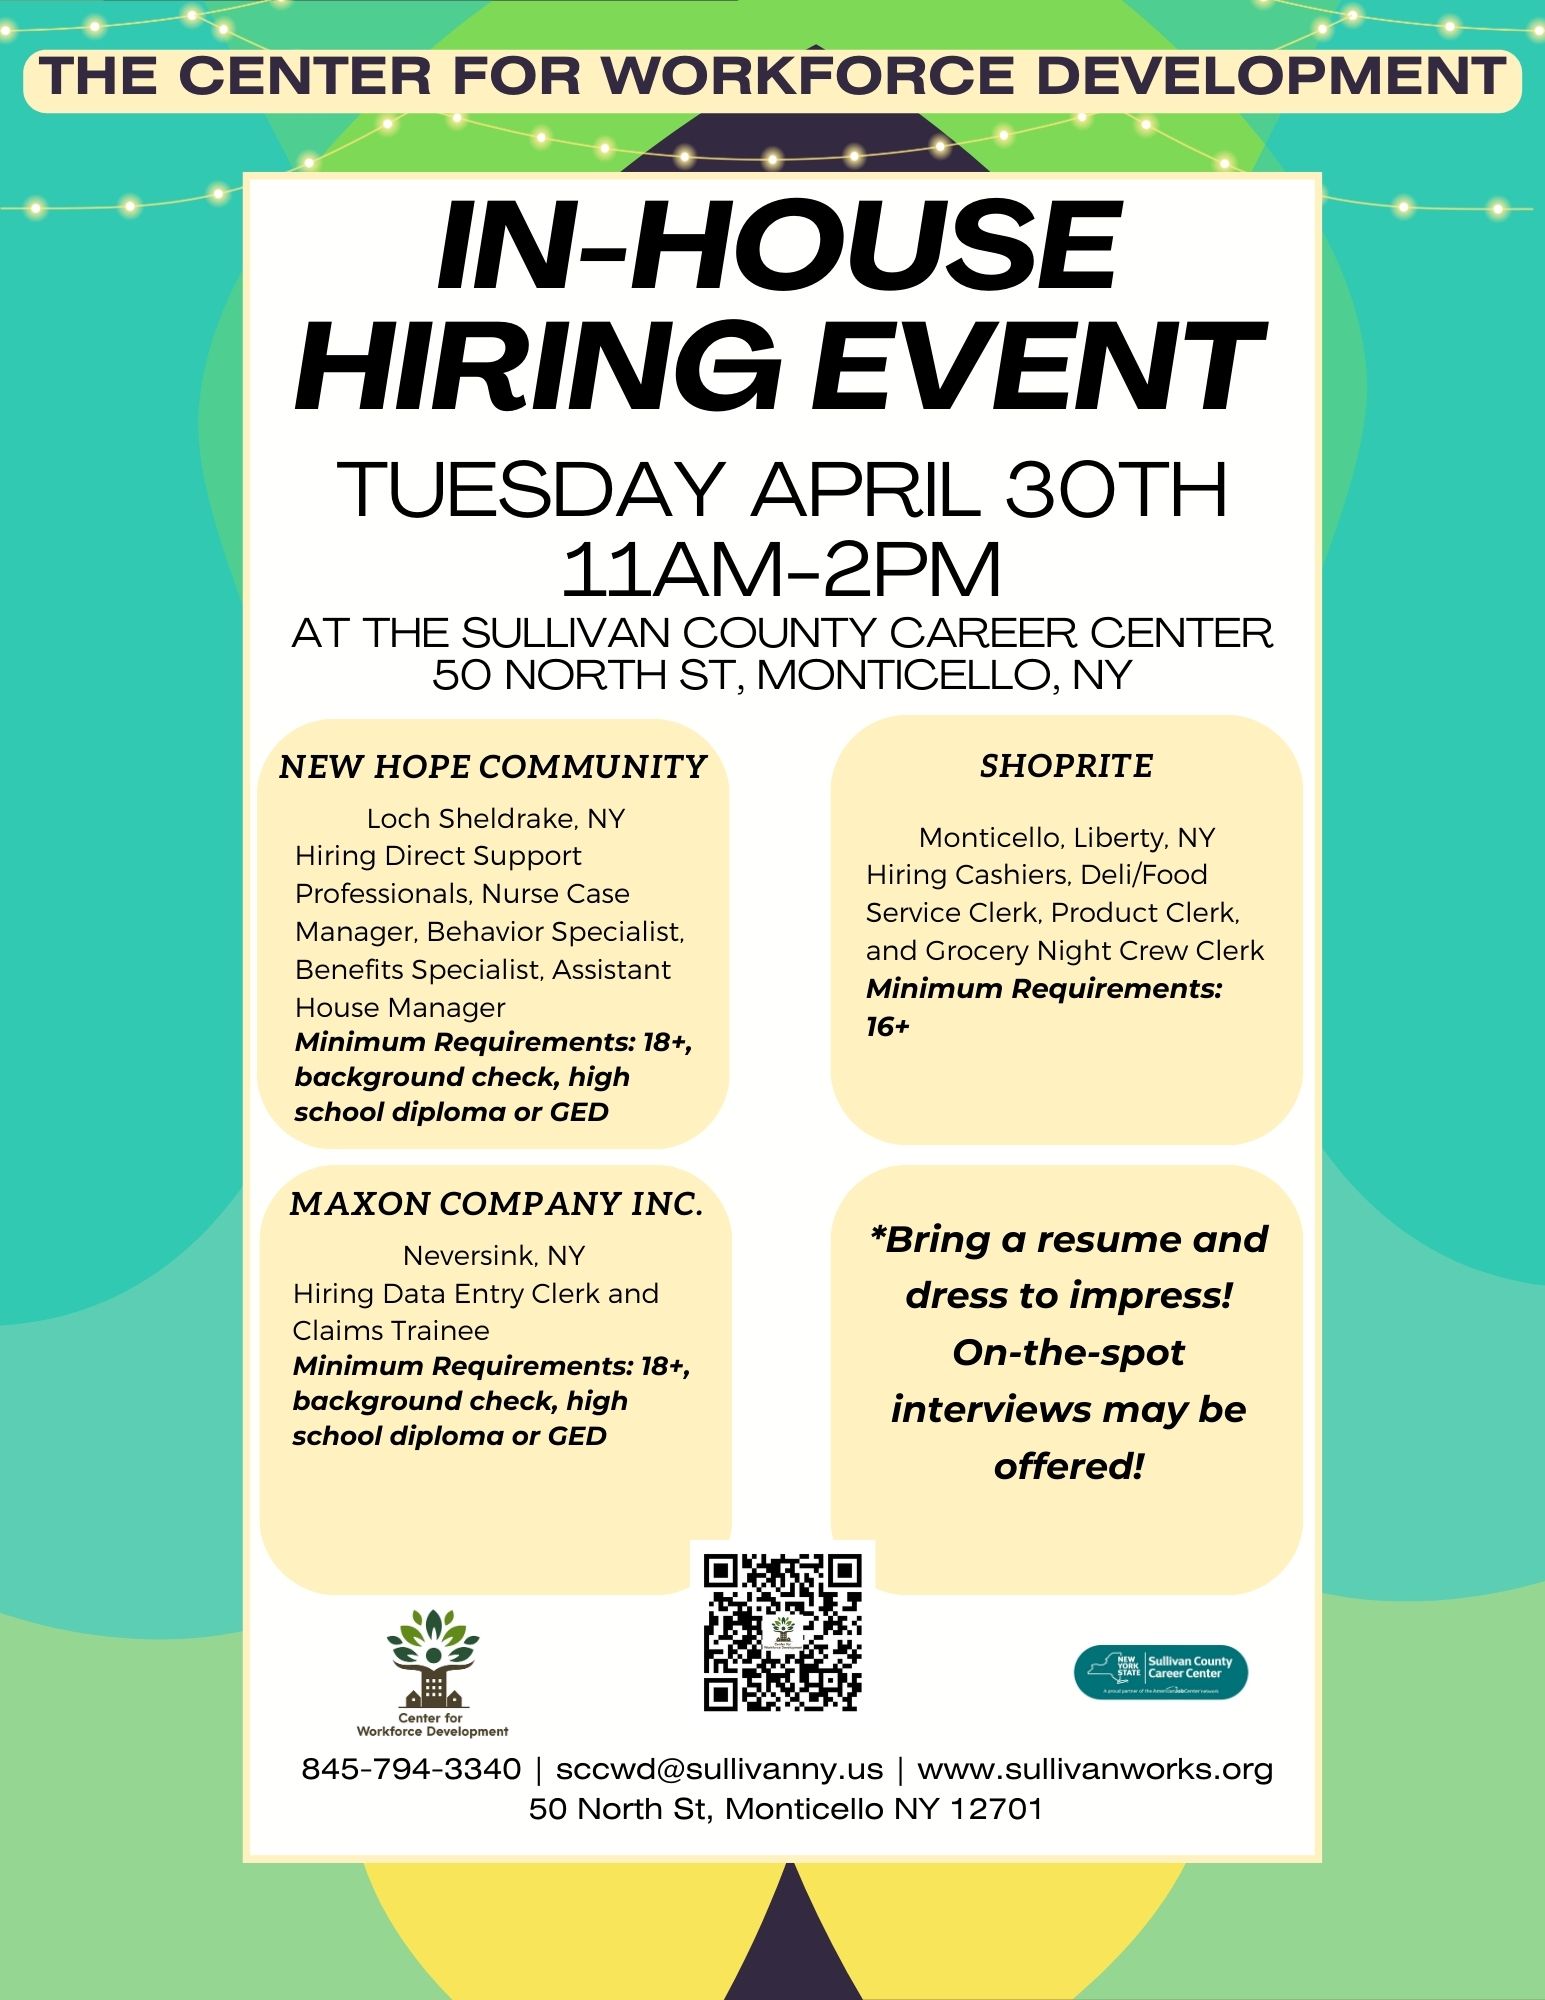 Hiring event flyer for April 30th 2024 featuring New Hope Community, Maxon Co, and Shoprite